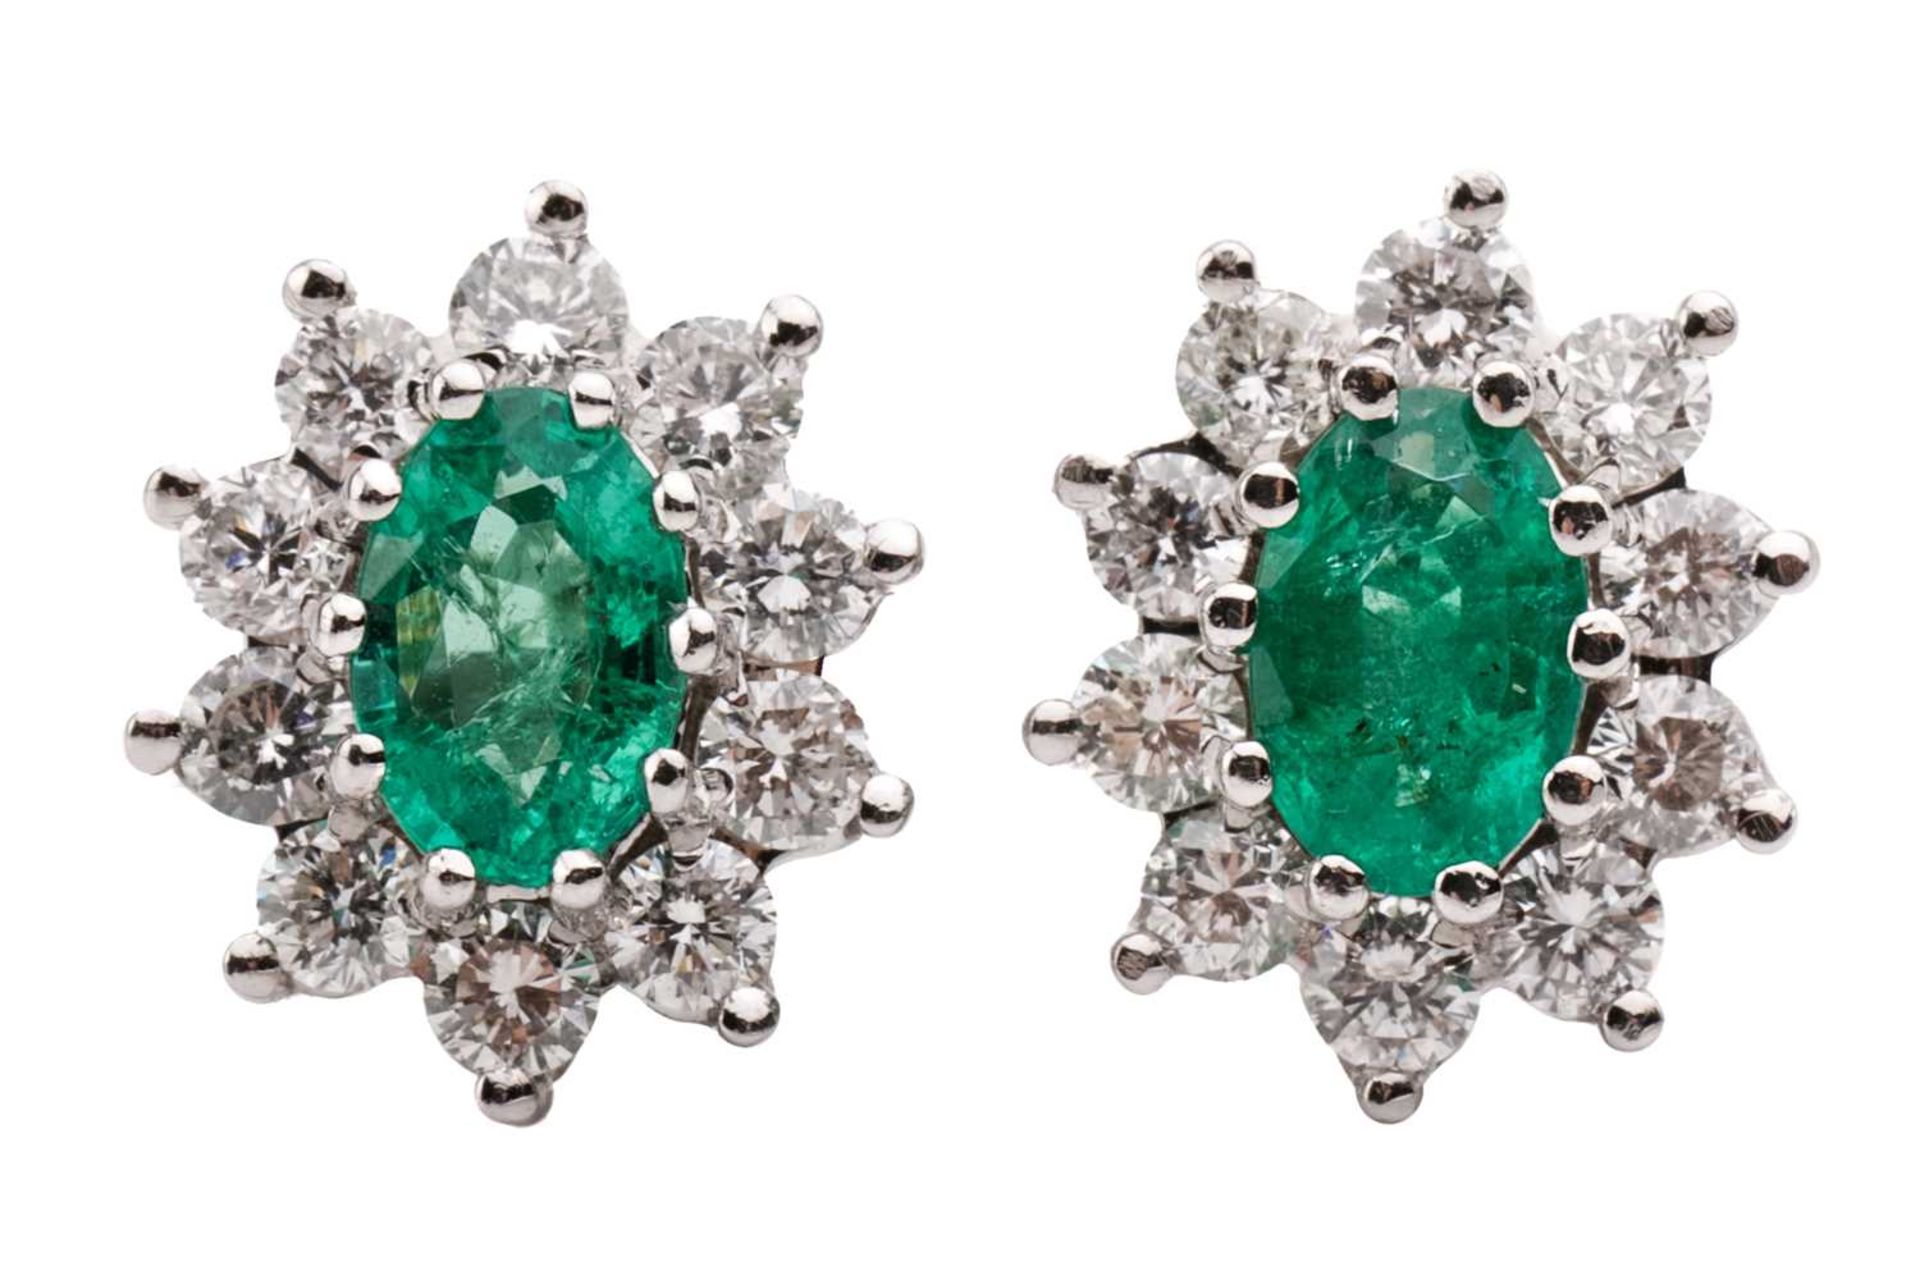 A pair of 18 carat white gold, emerald and diamond earrings; the oval cut emeralds in claw mounts